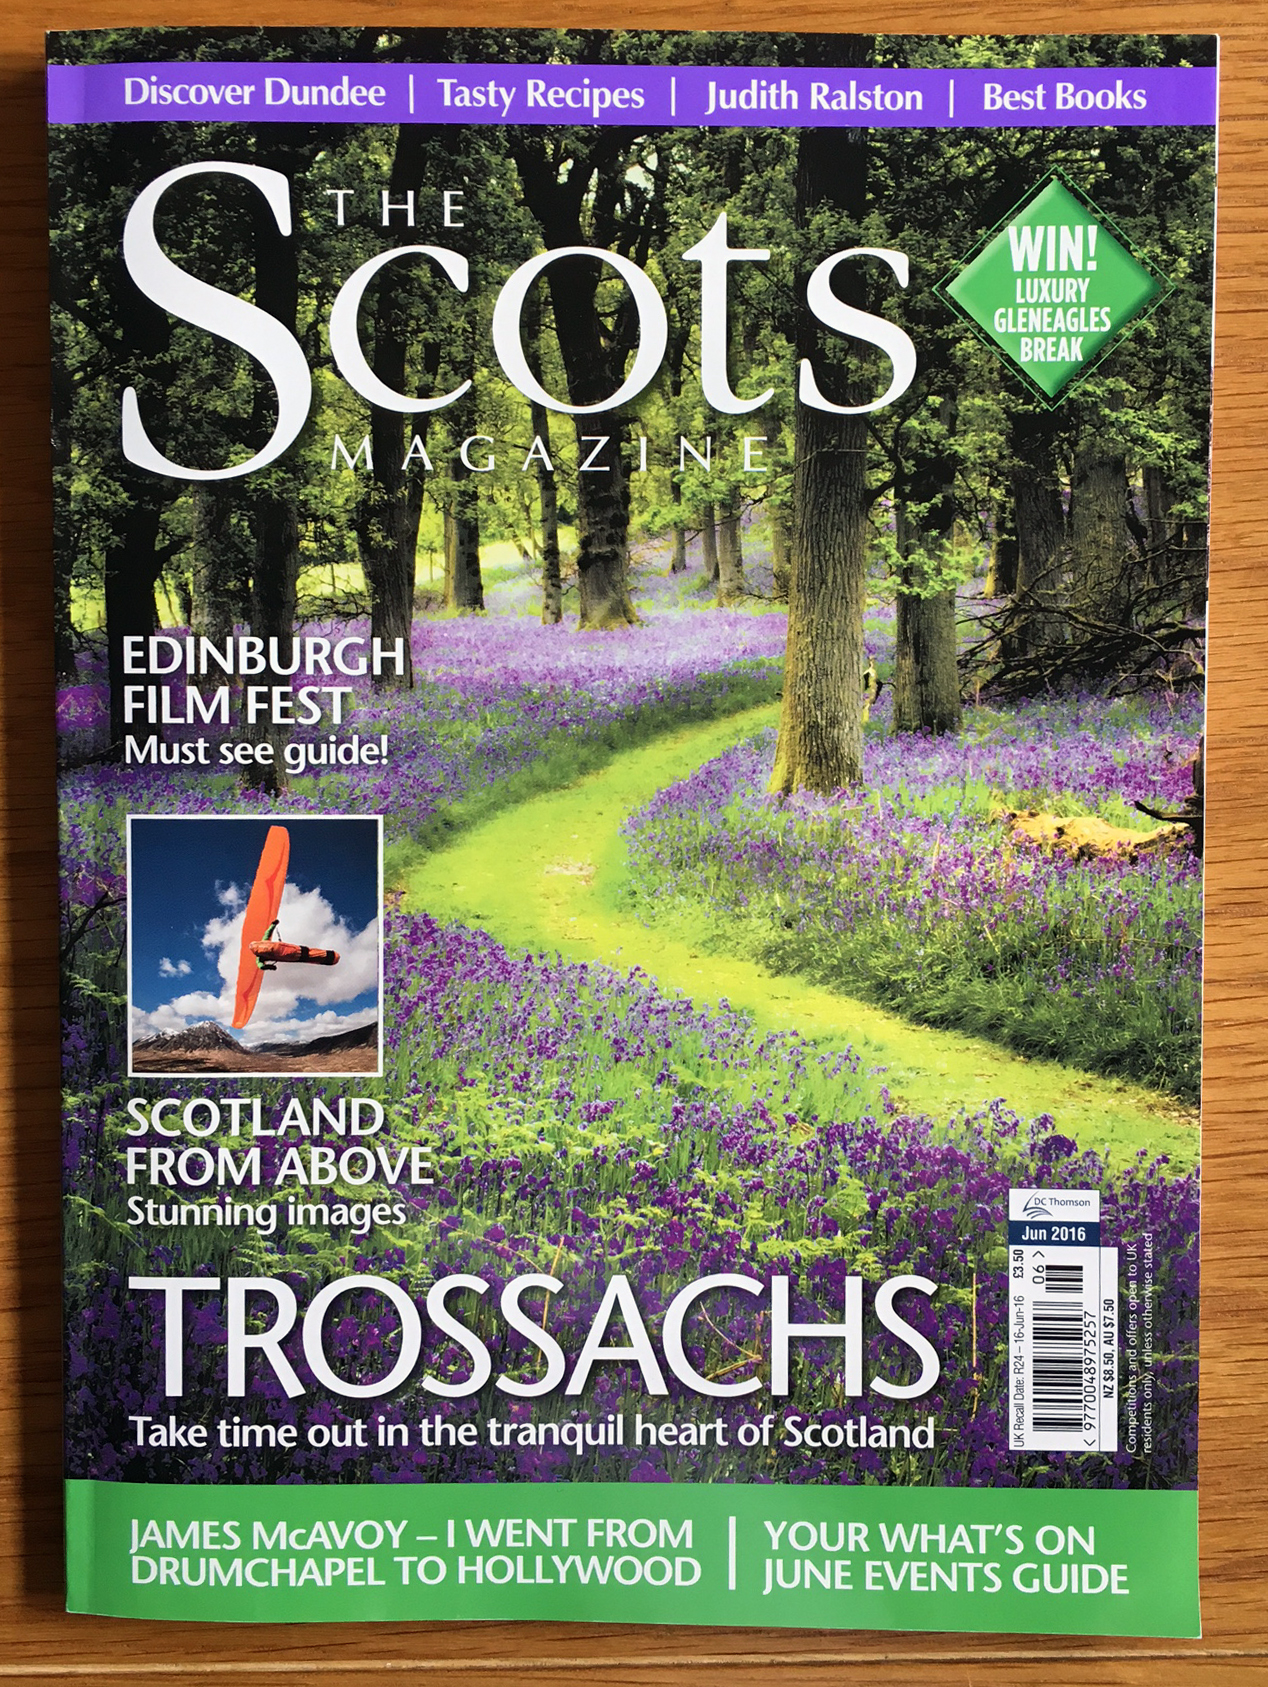   Scots Magazine,&nbsp;June 2016   Delighted to be asked to provide an image of the bluebells at Kinklaven Woods, Perth for the 'Scots' magazine.  A quintessentially Scottish &nbsp;institute with a great reputation for quality and coverage. 